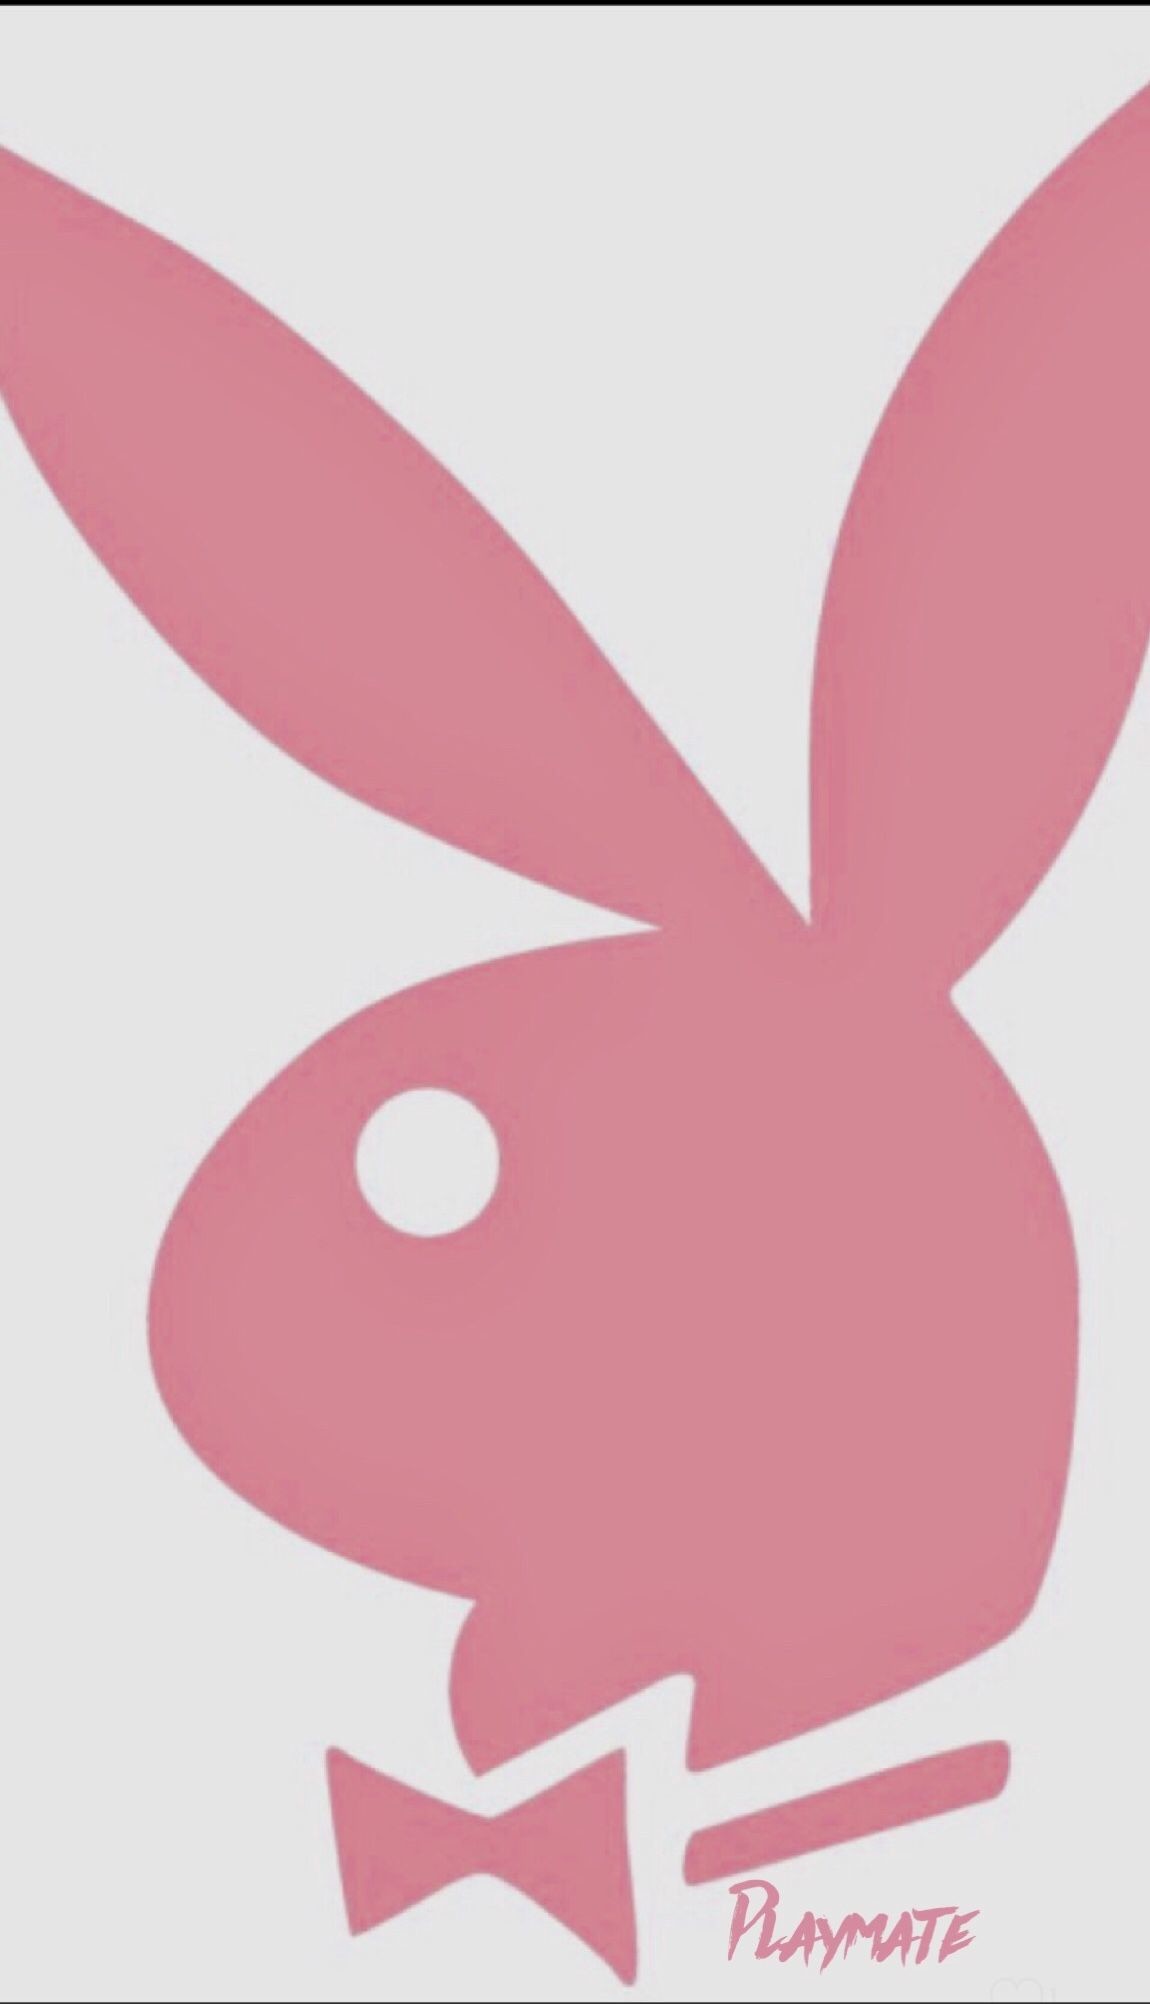 Playboy Backgrounds (51+ pictures)